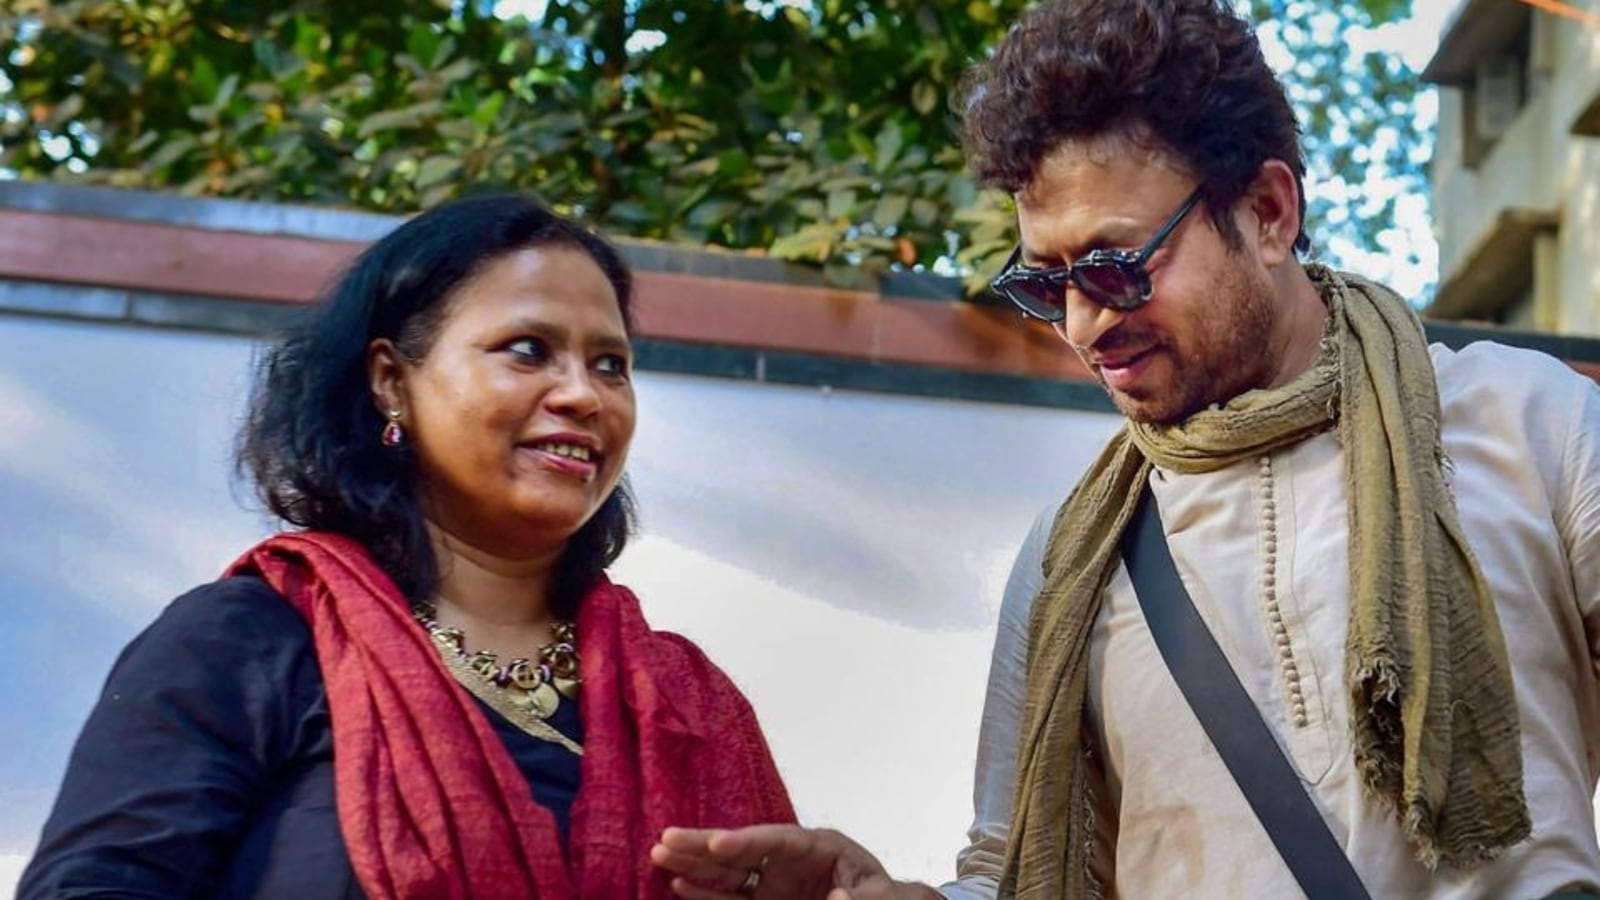 Irrfan asked Sutapa Sikdar to make khichdi when she struggled with cooking in initial days of their marriage